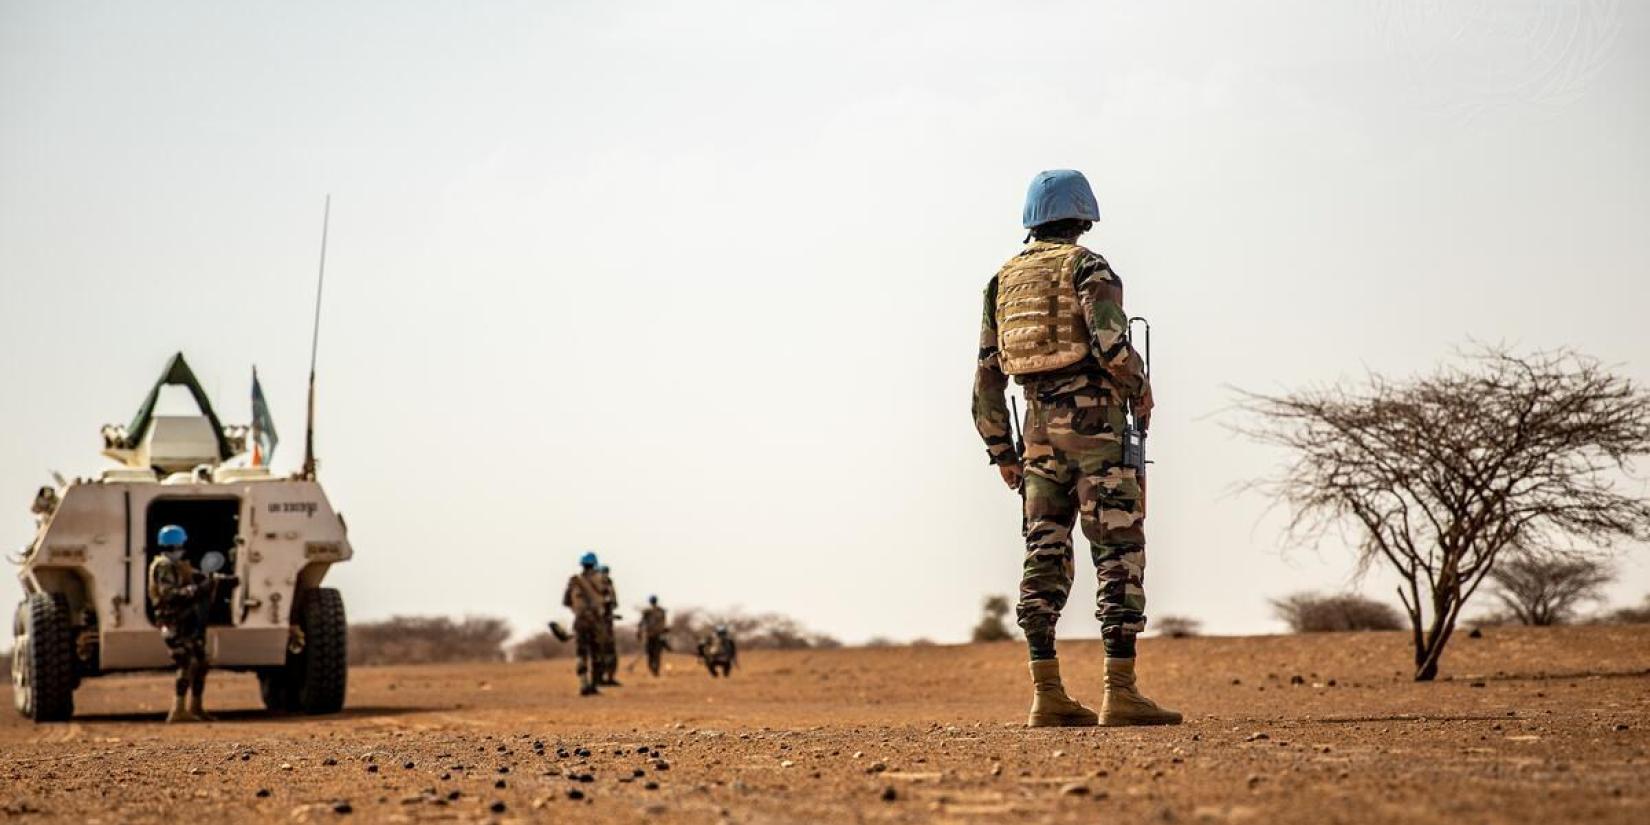 Blue helmets of the UN peacekeeping mission MINUSMA stand next to a white armoured vehicle in a barren, sandy landscape in Mali.